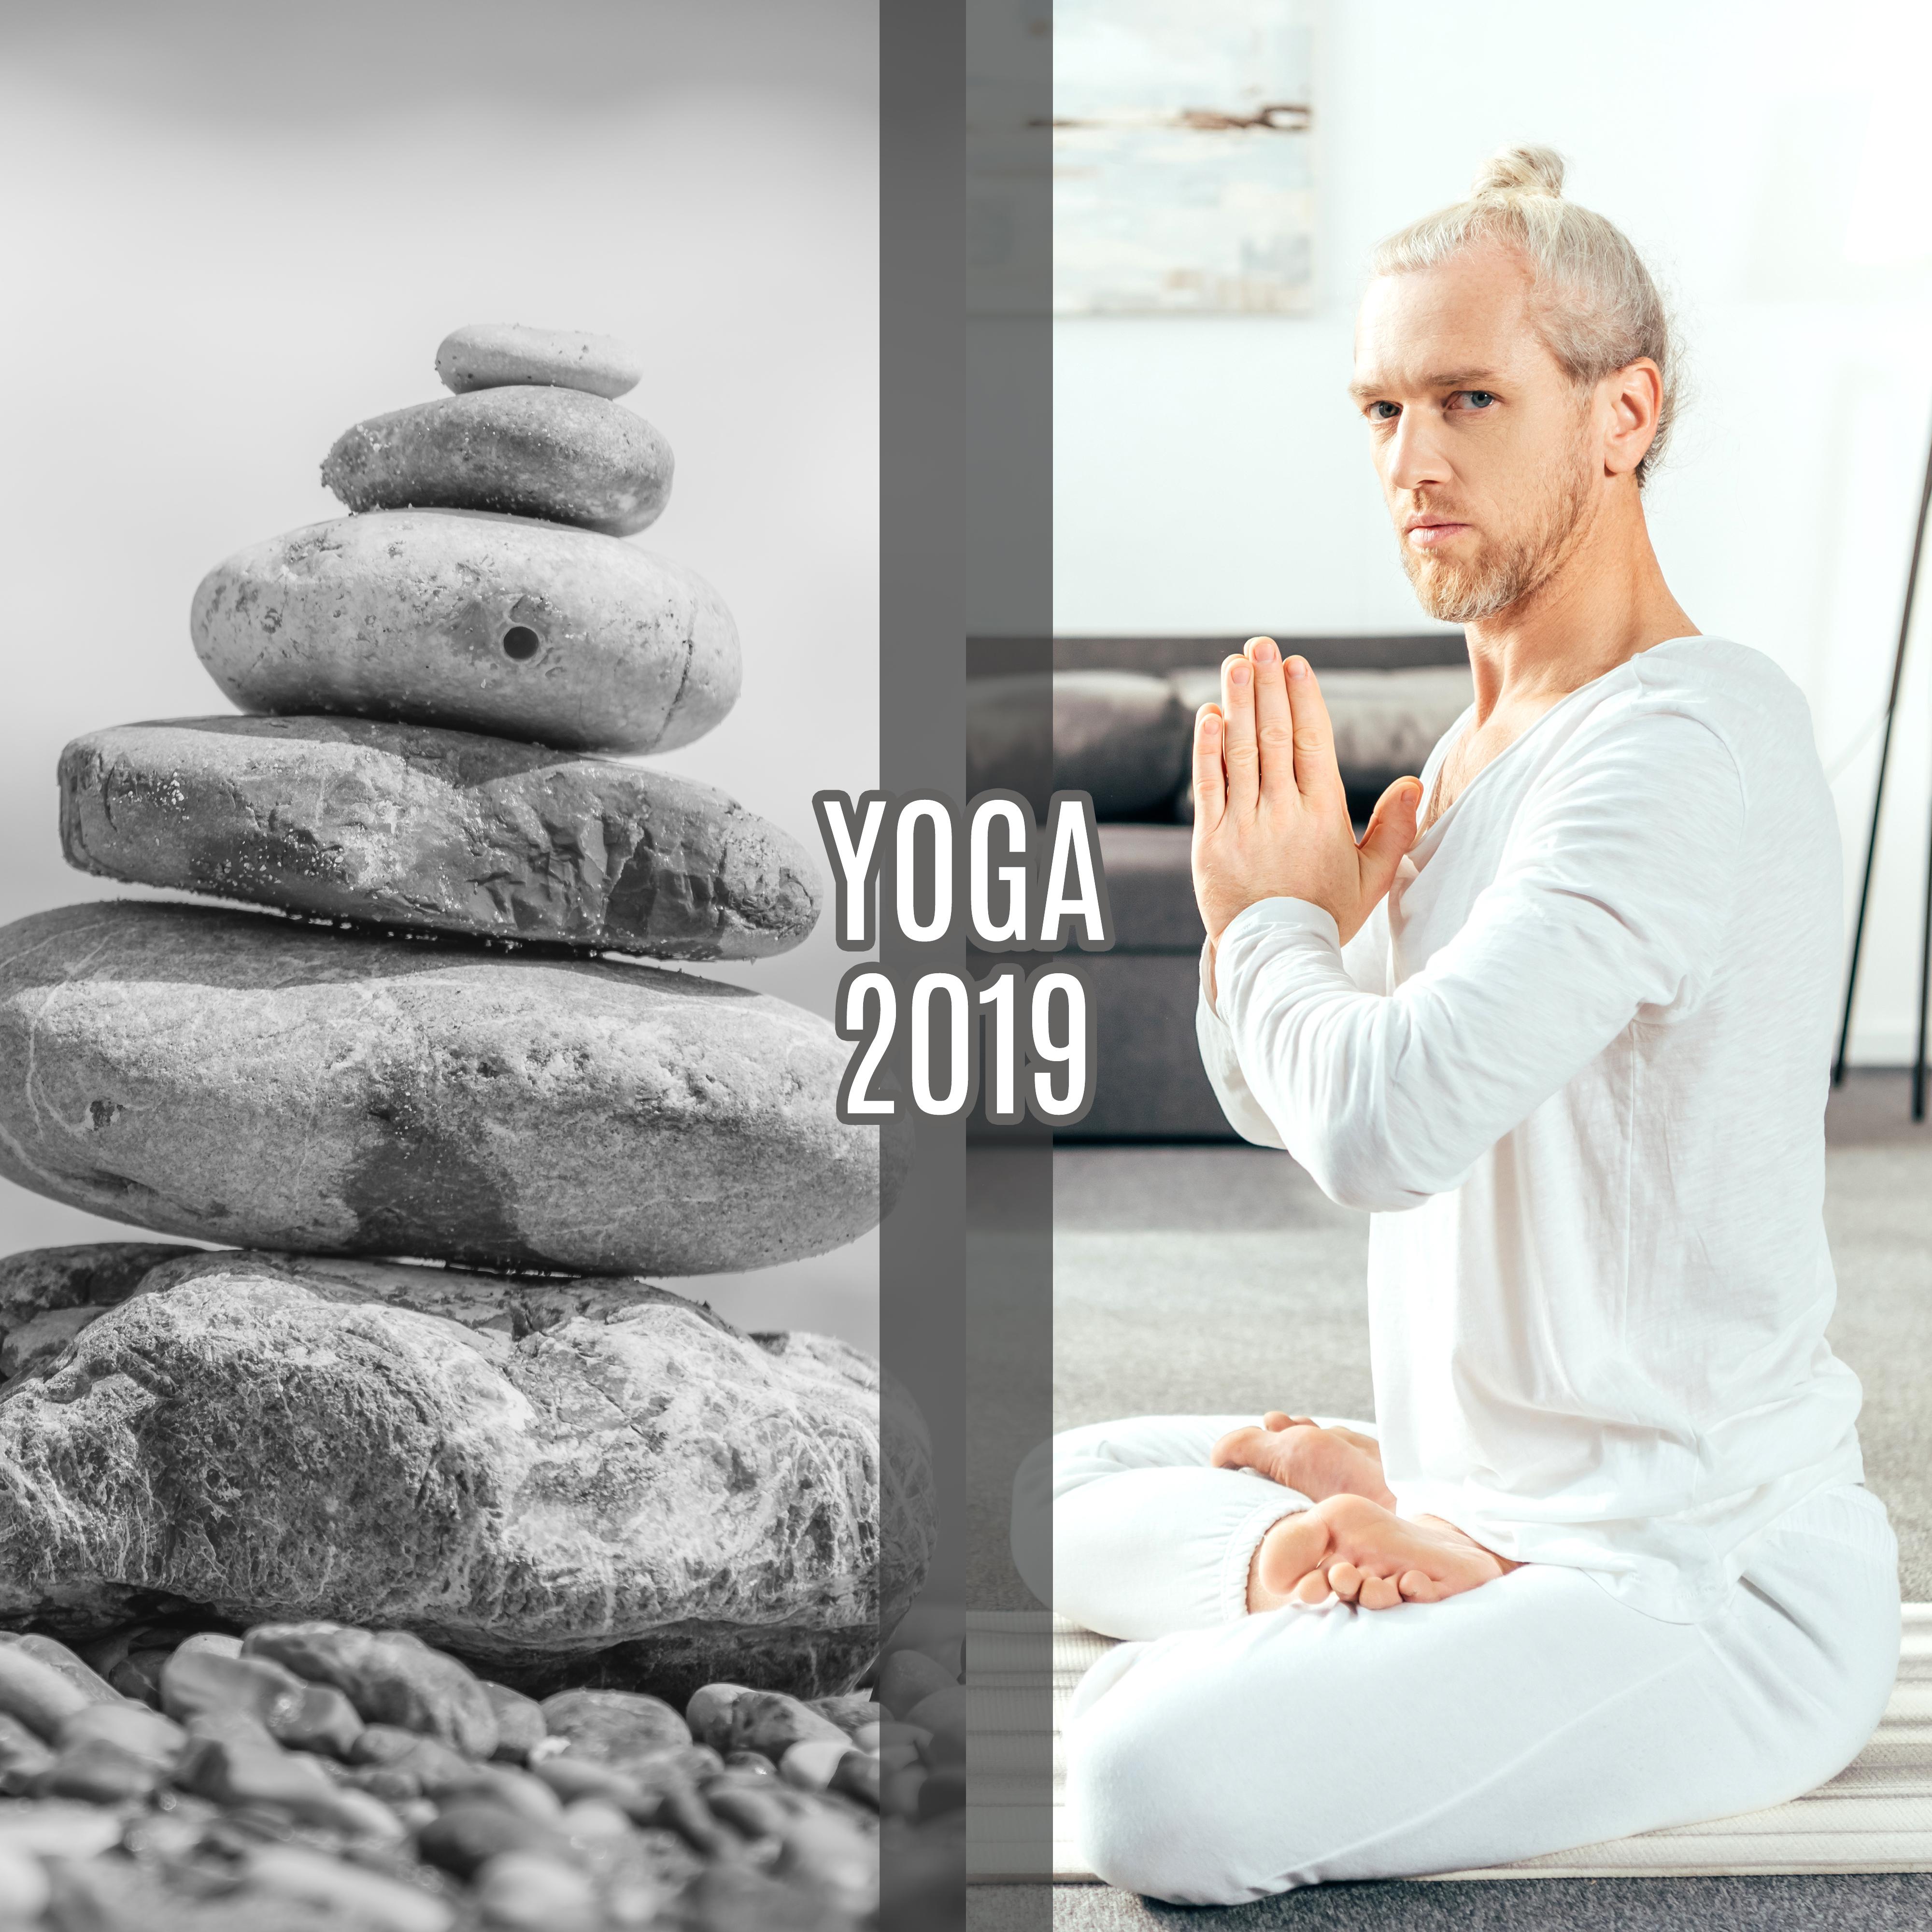 Yoga 2019  Meditation Music Zone, Peaceful Melodies for Relaxation, Zen Lounge, Meditation Therapy, Yoga Meditation, Mindfulness Ambient Sounds